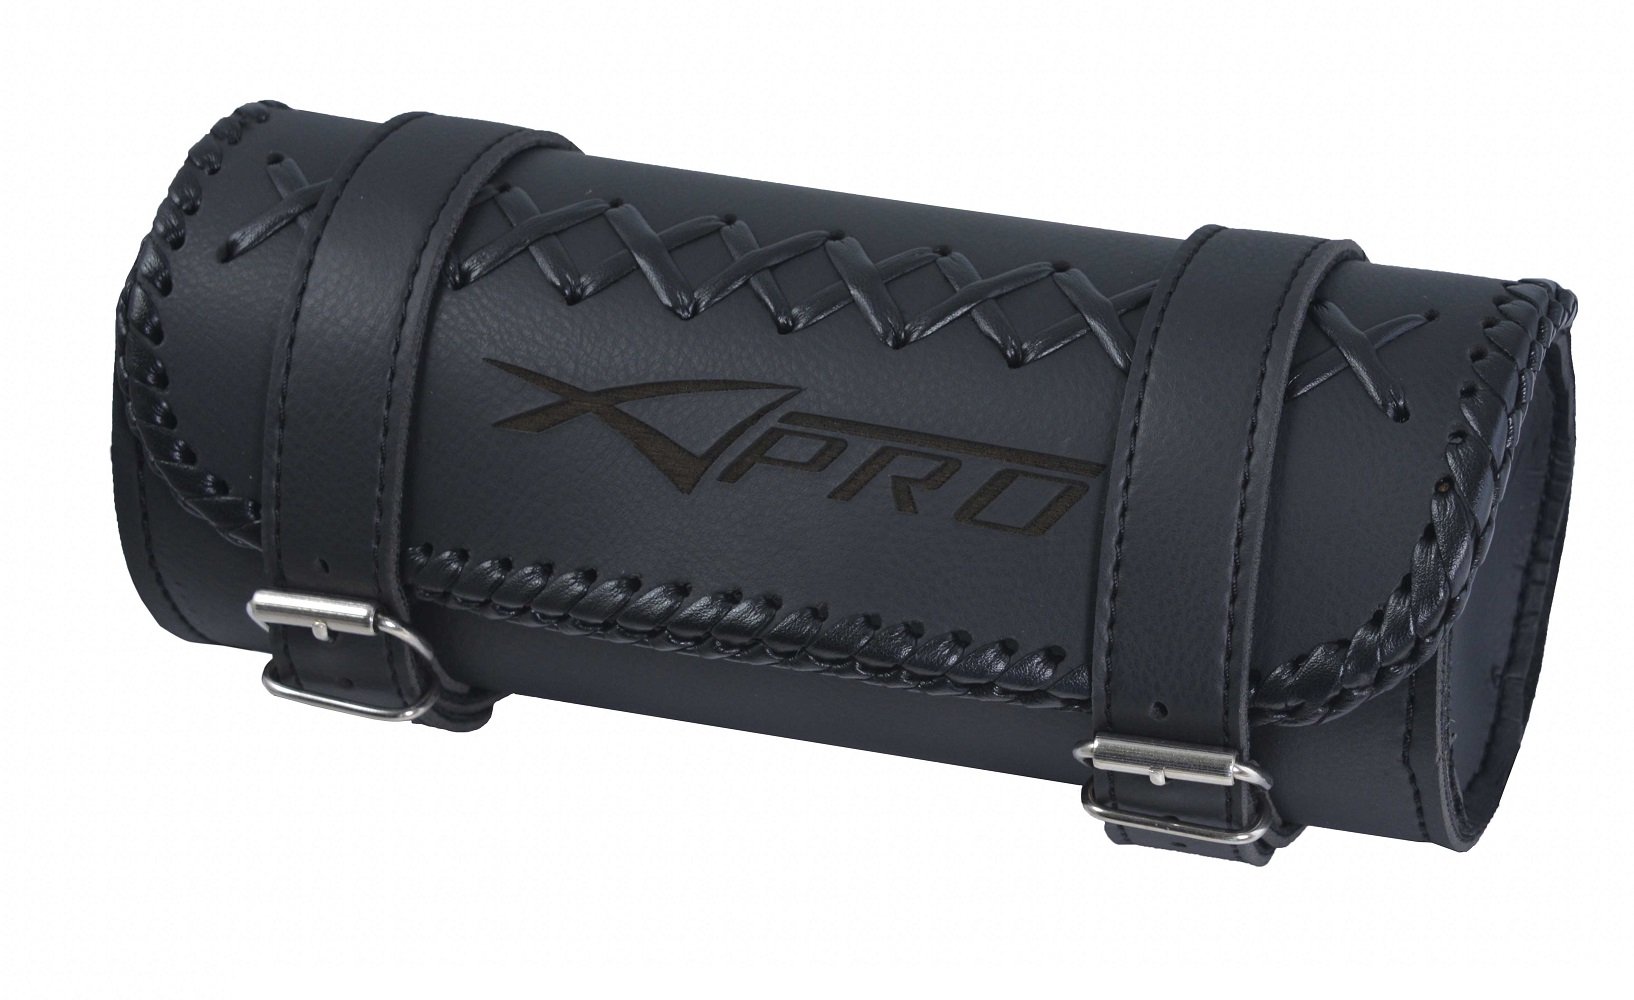 A-Pro Heavy Duty Tool Roll Bag Pannier Luggage Motorcycle Motorbike Sonicmoto von A-Pro